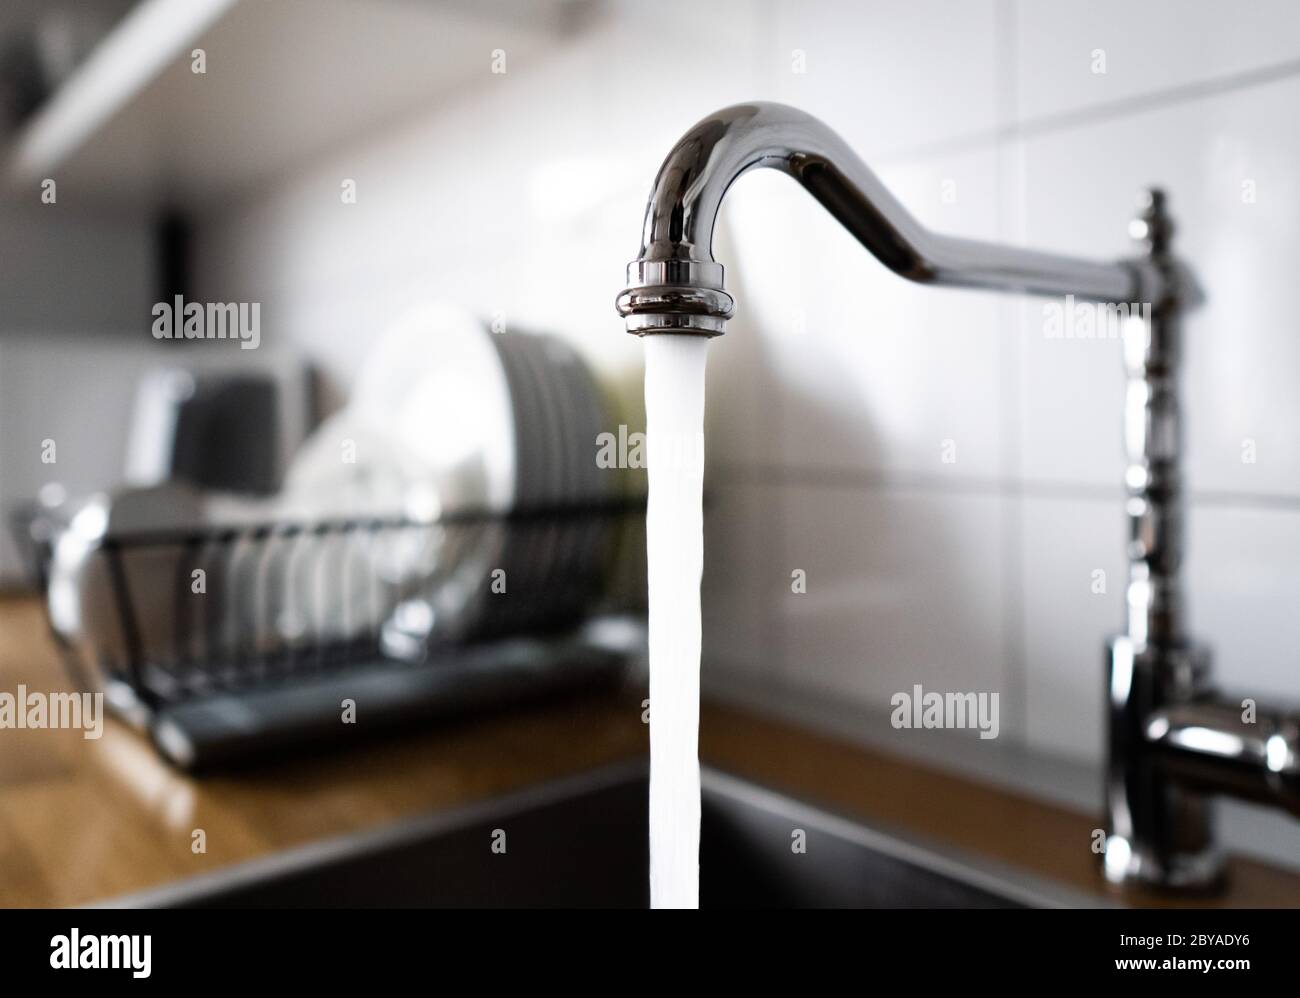 Water flowing out of a kitchen stainless steel tap into the sink. Wasting water by leaving a chrome faucet tap running. Overusing household water Stock Photo